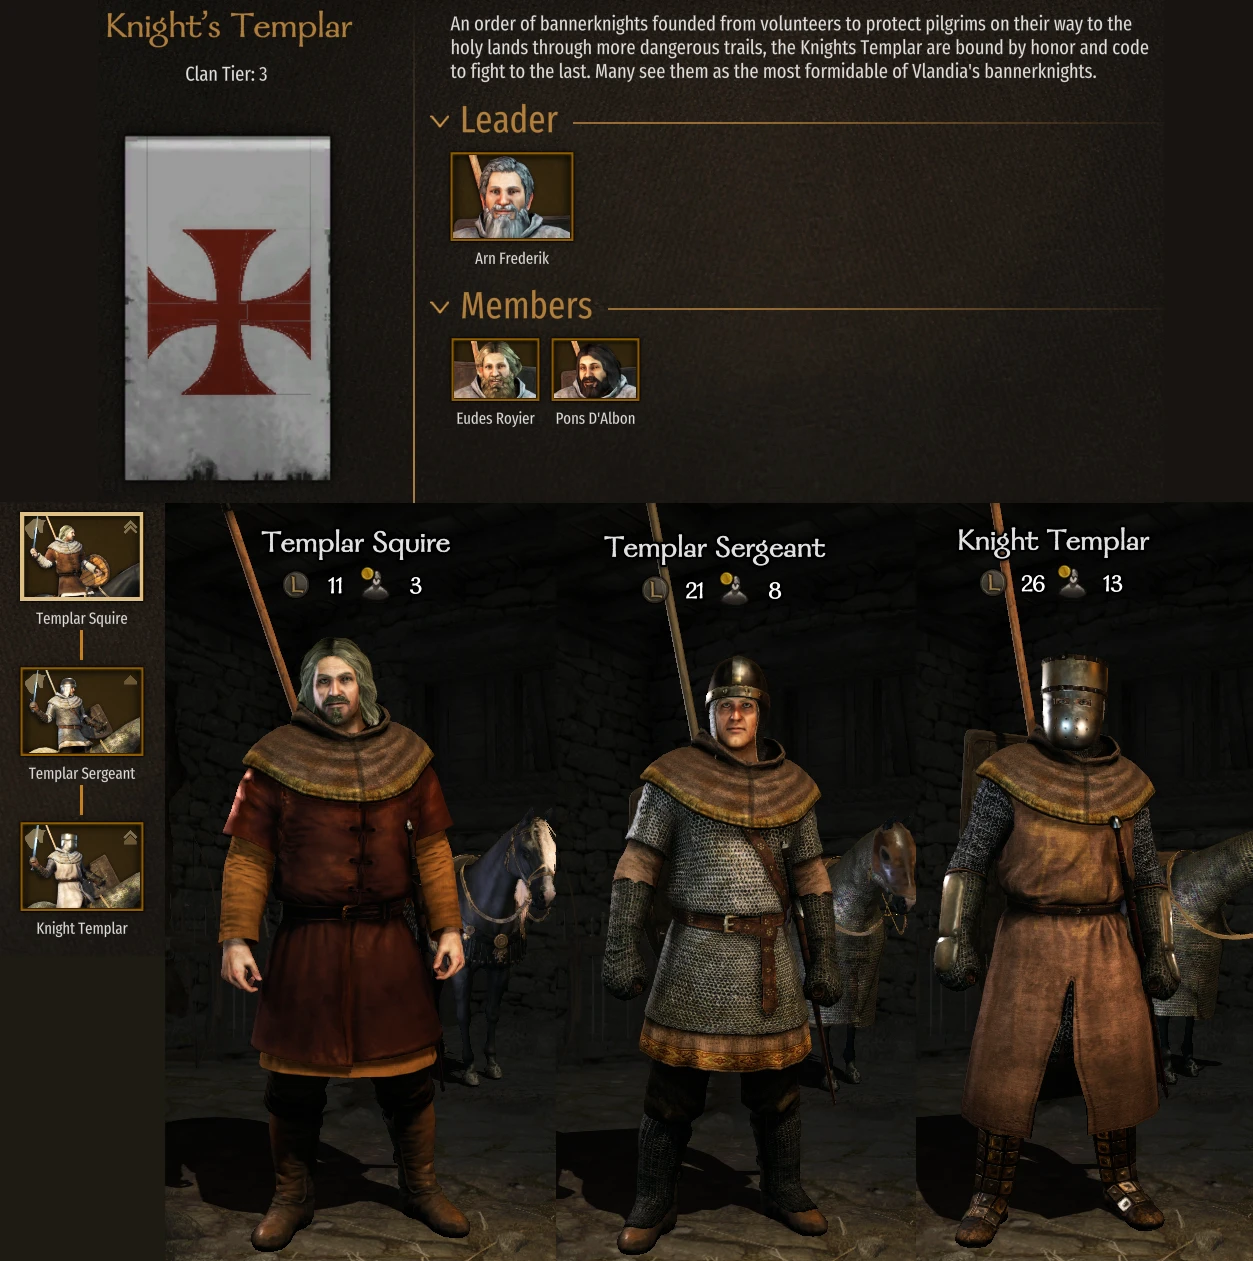 mount and blade 2 bannerlord mod